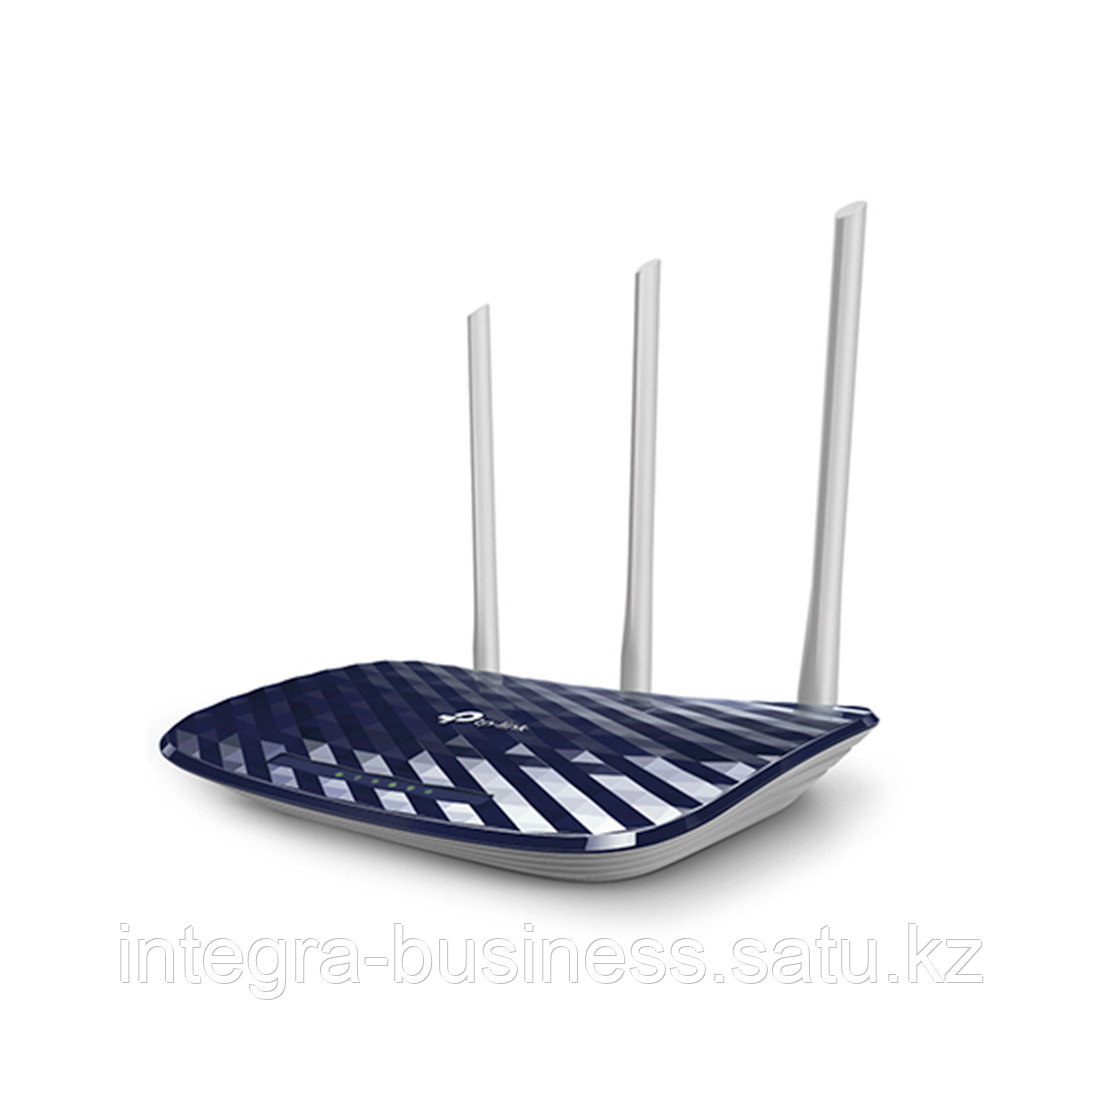 Маршрутизатор TP-Link Archer C20, фото 1